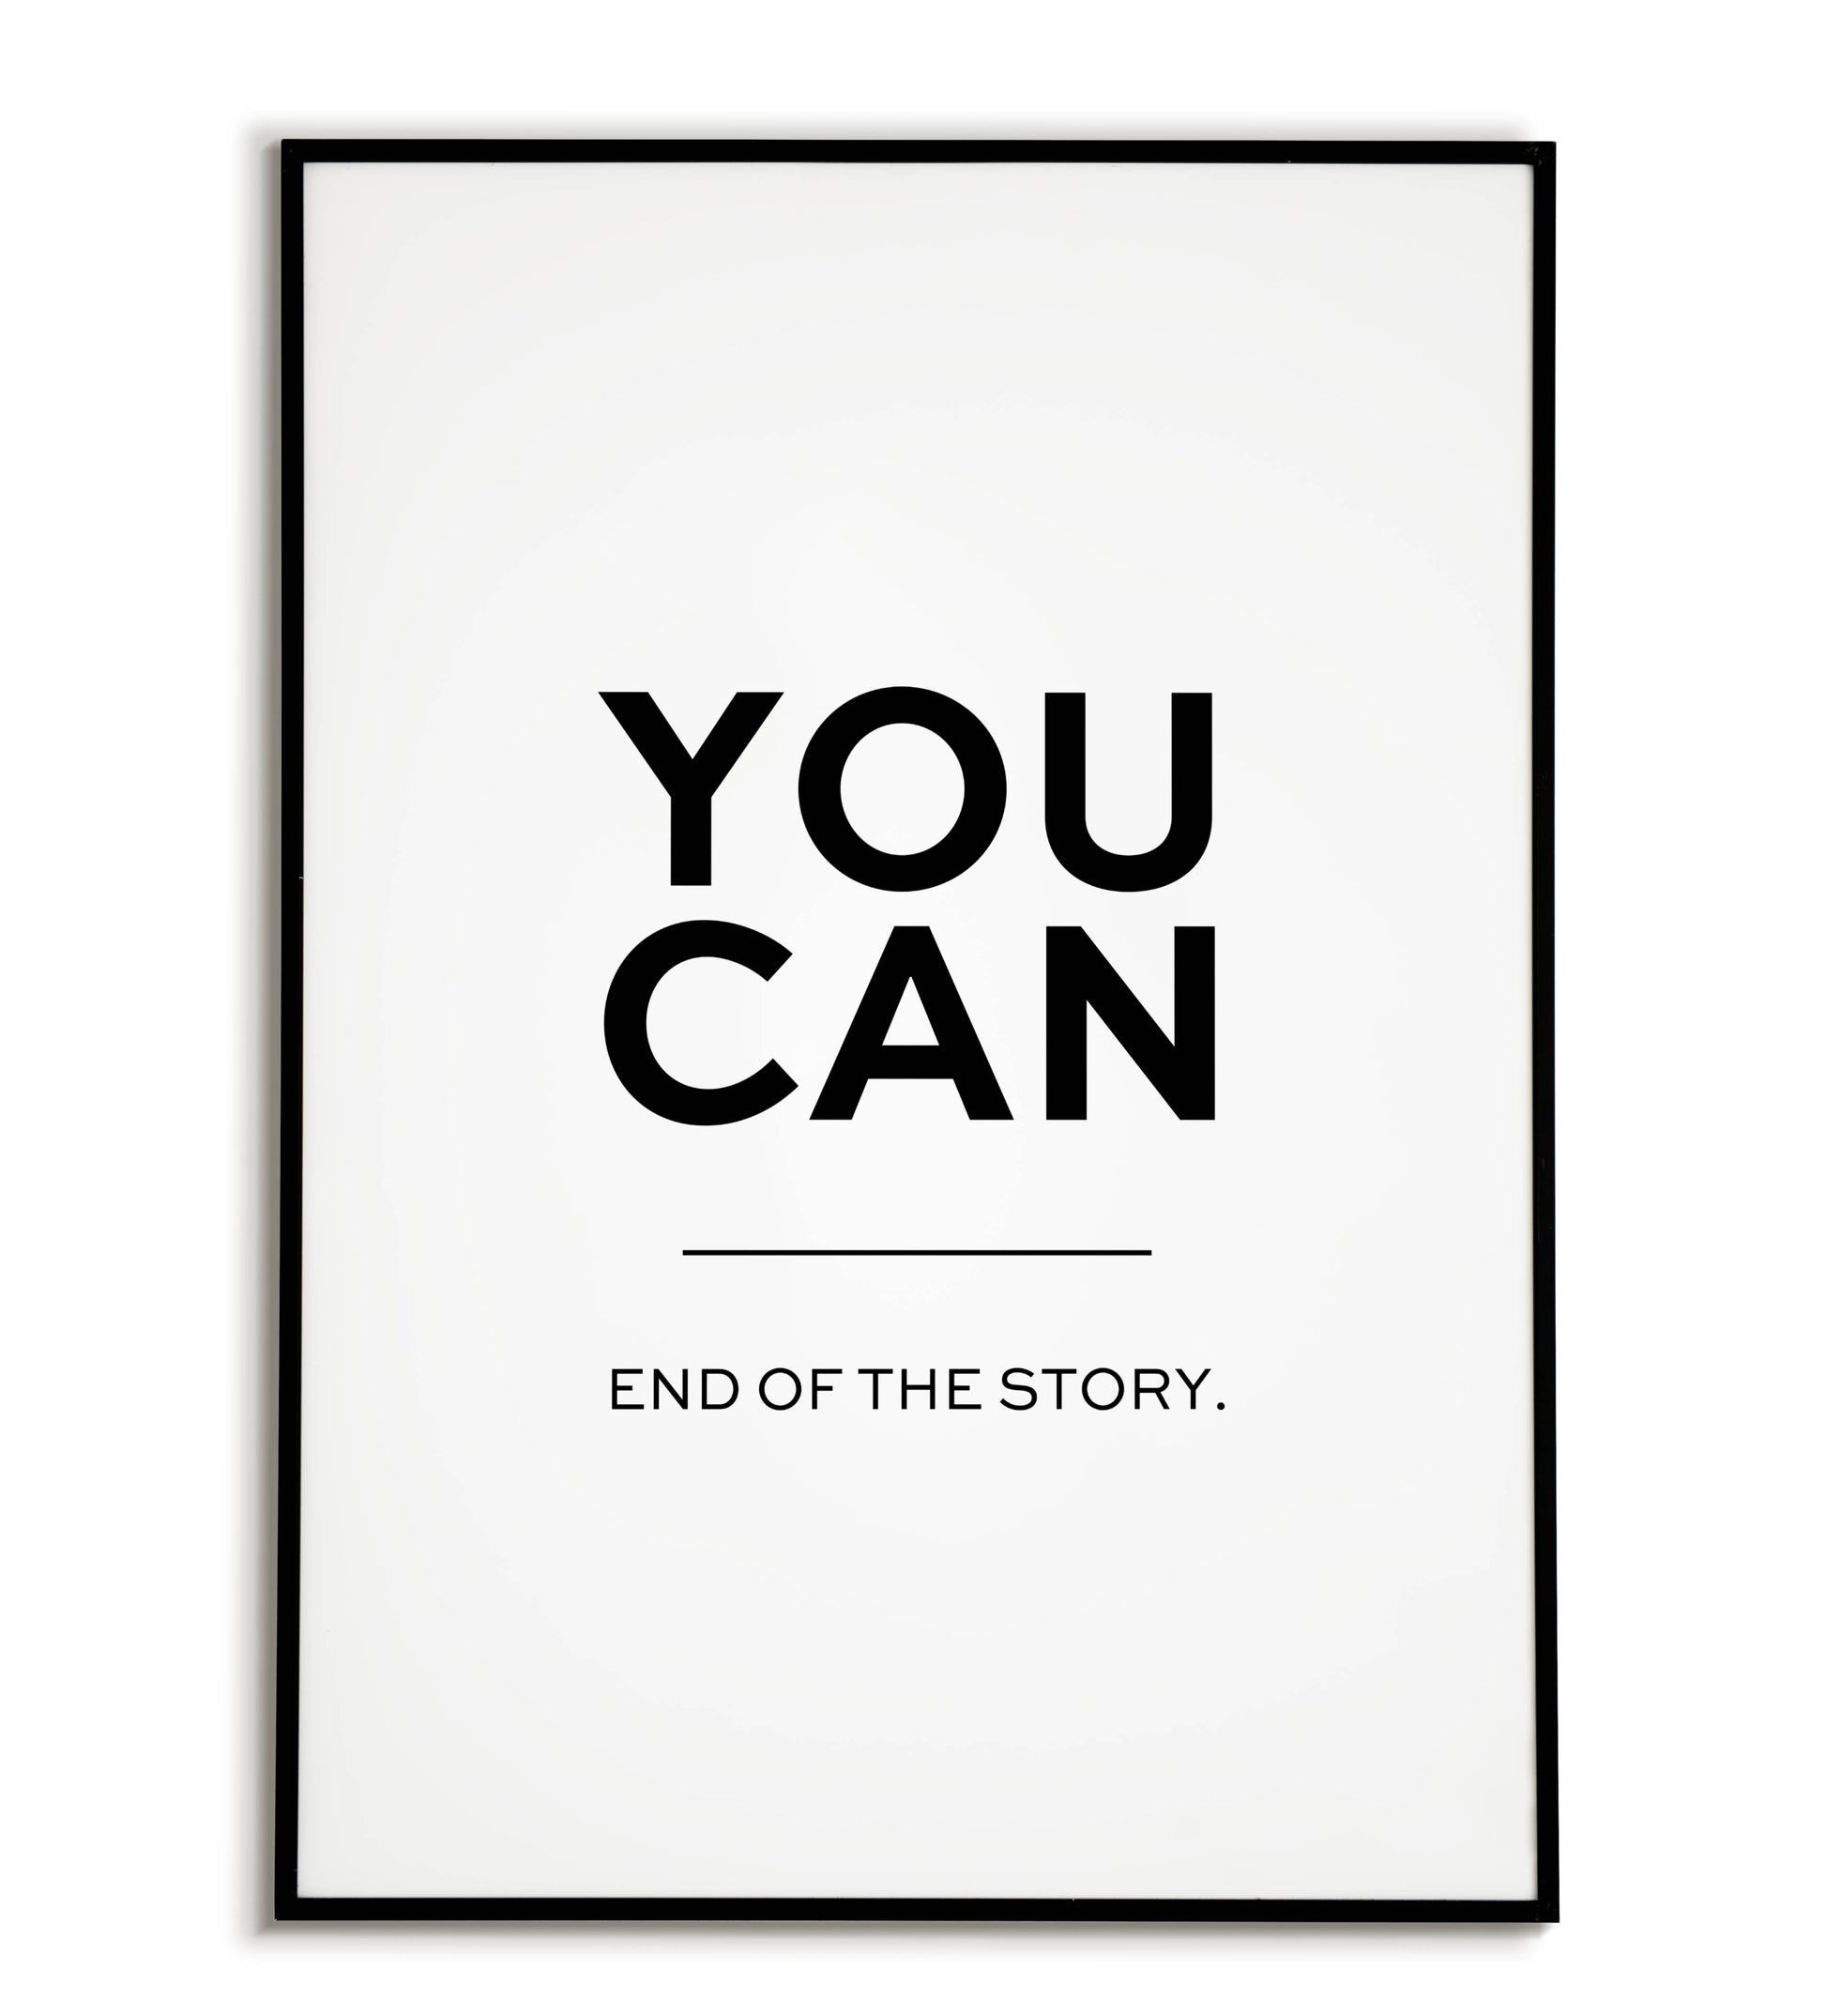 You can - End of the story - Printable Wall Art / Poster. Download this empowering quote to believe in yourself.